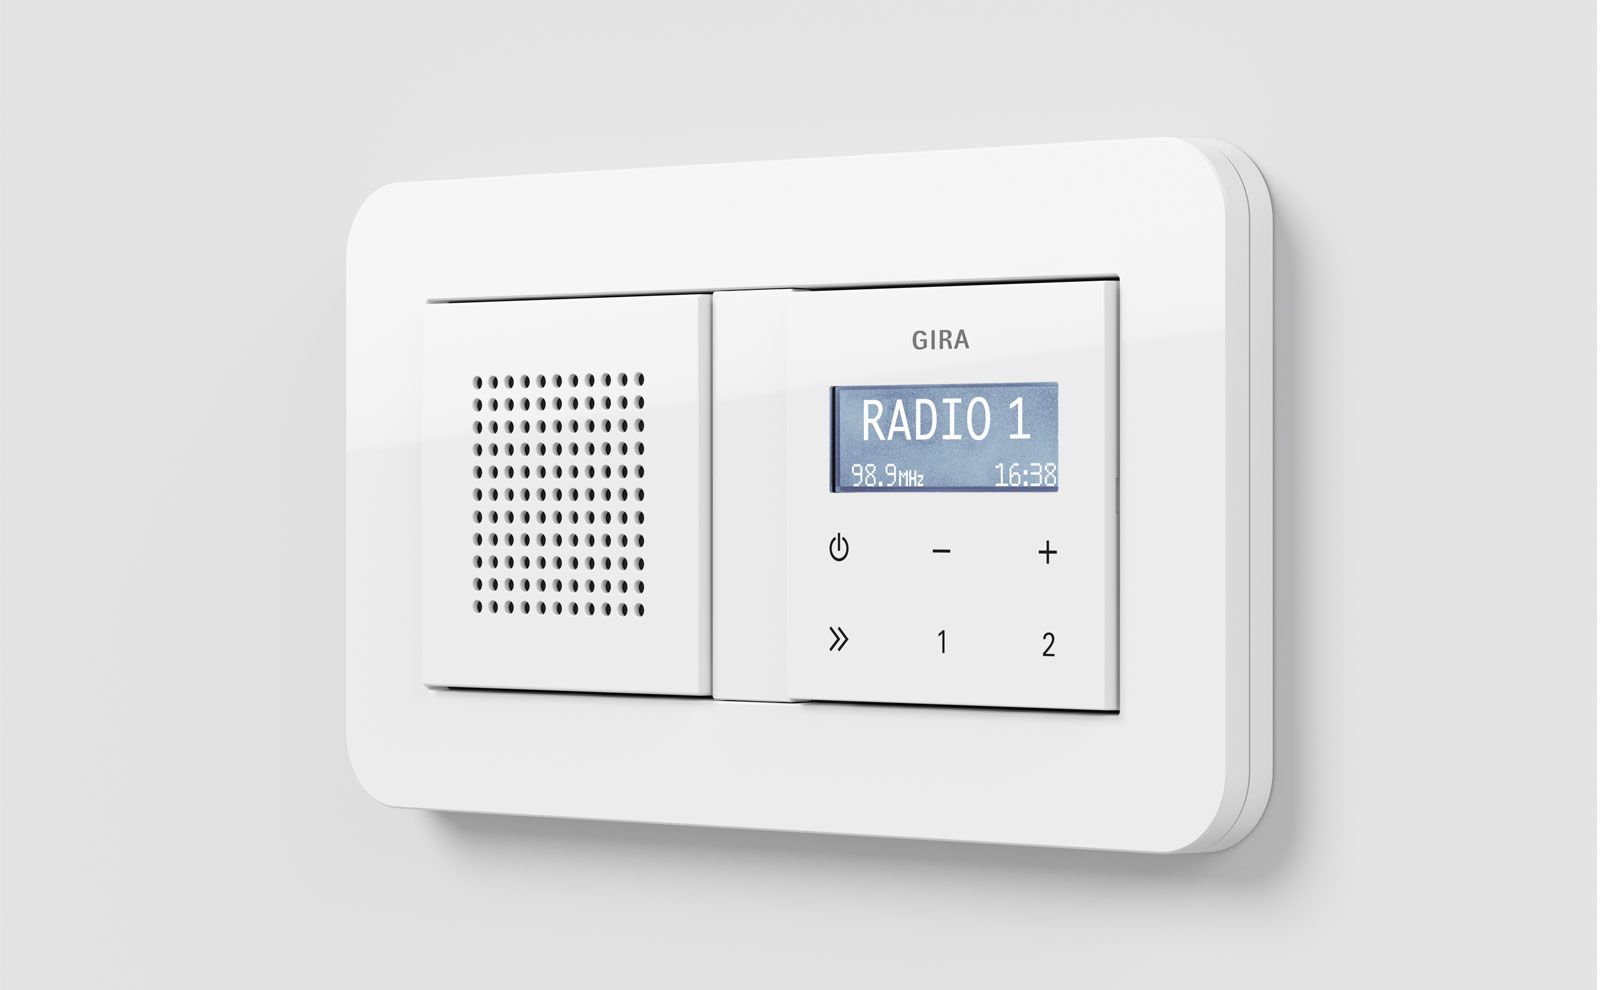 The Gira radio fills your home with music, podcasts, and more: ✓ pure sound ✓ easy-to-use ✓ quick installation.